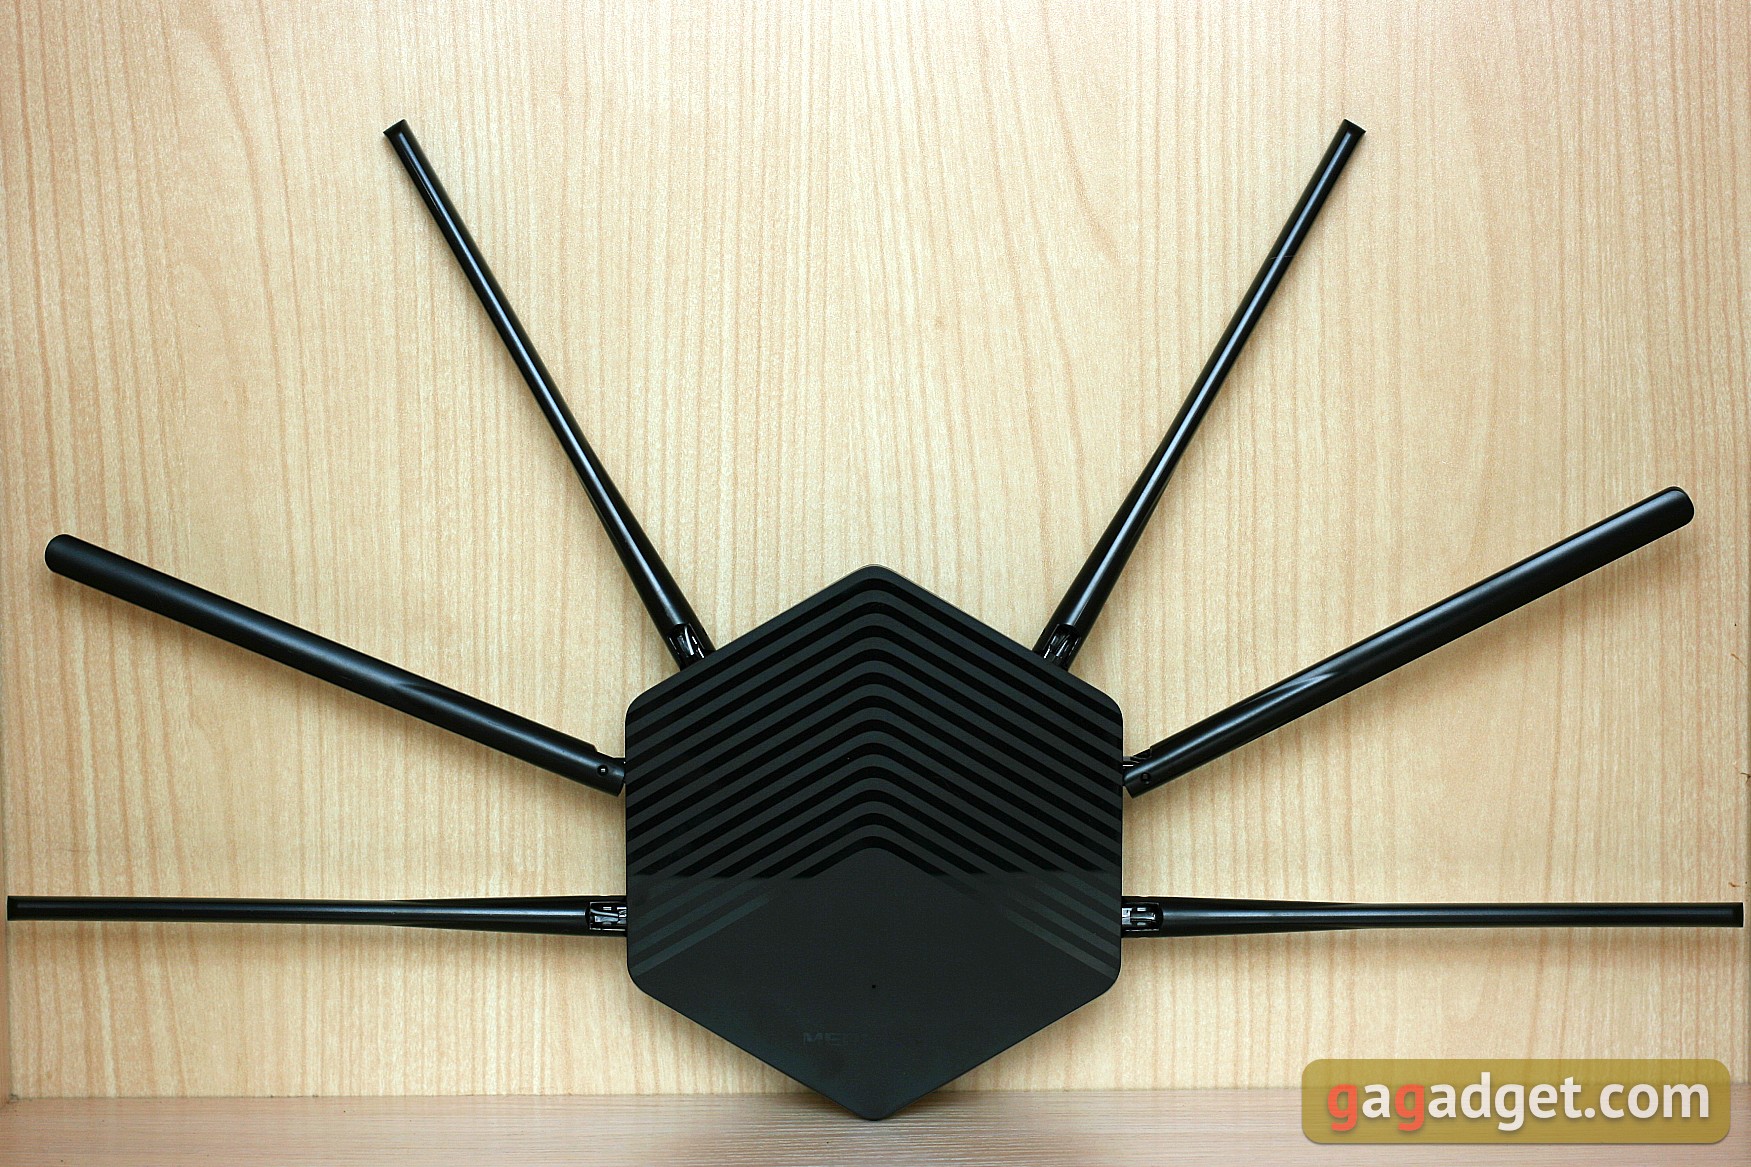 Mercusys MR70X Review: Cheapest WiFi 6 AX1800 Router